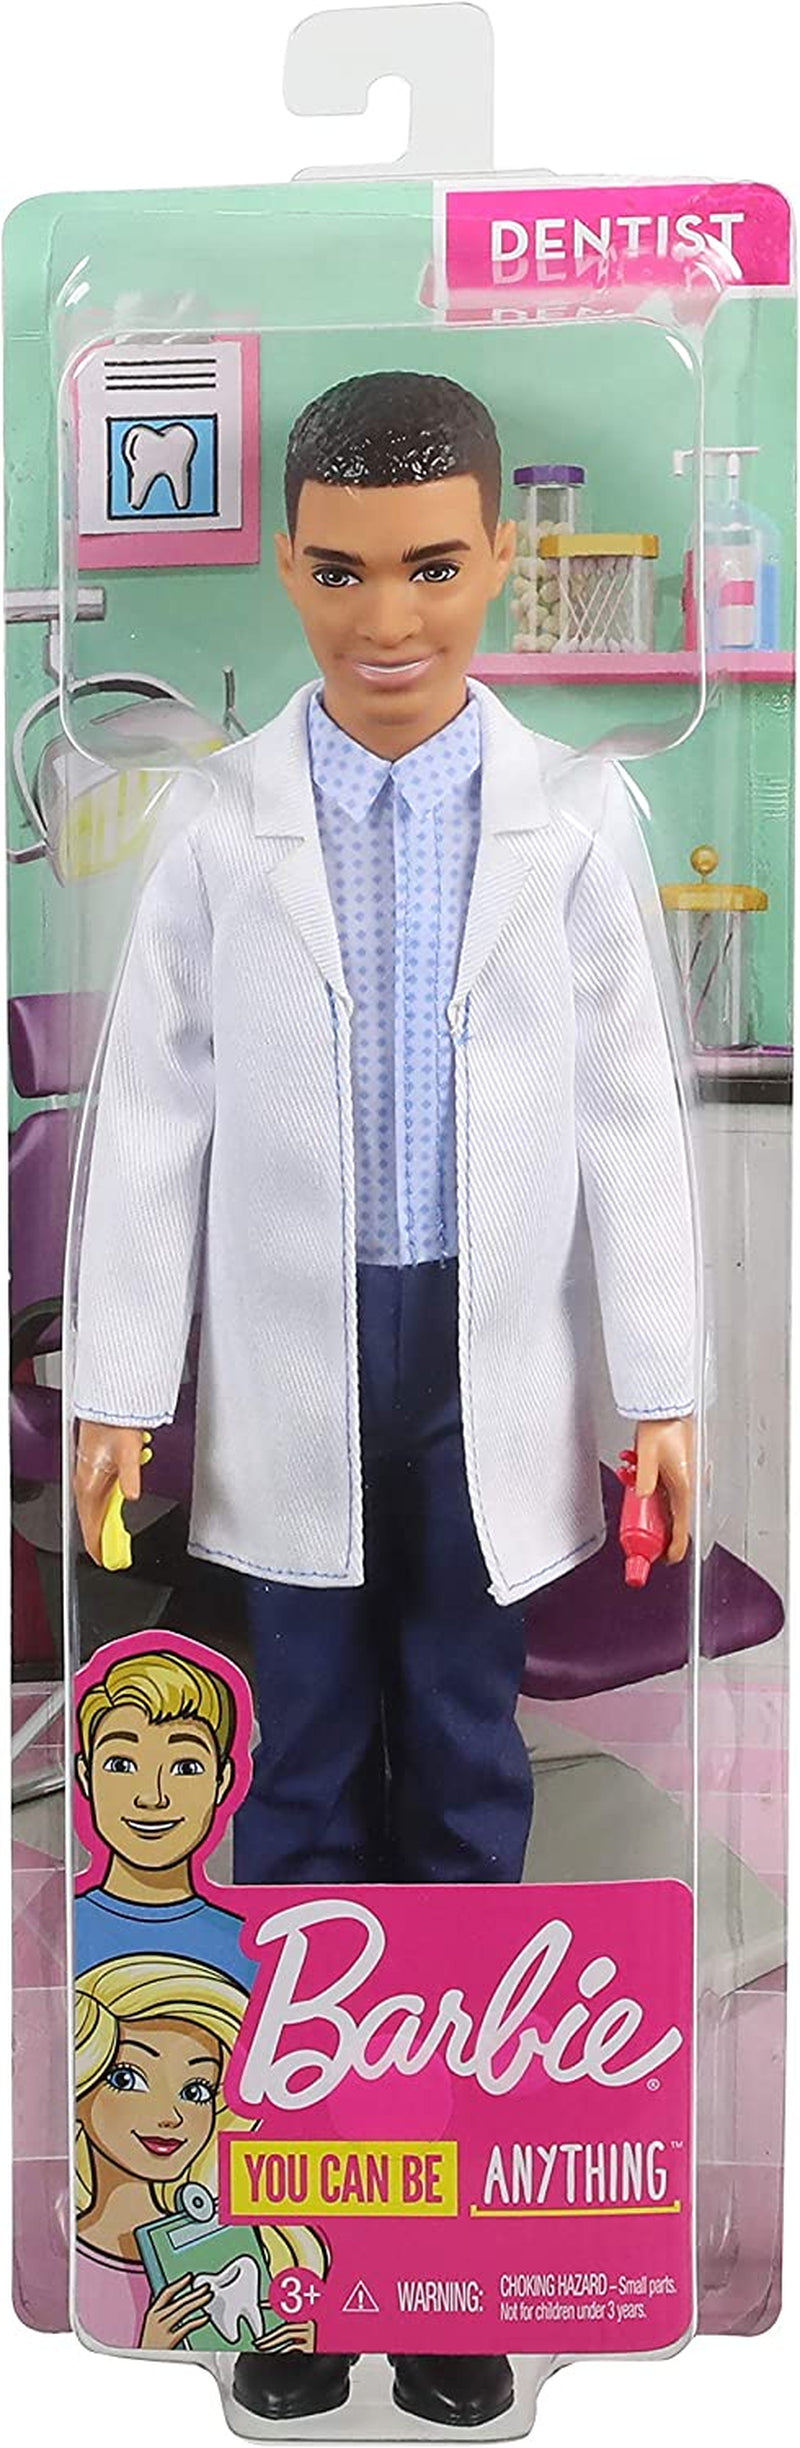 Ken Brunette Dentist Doll with Professional Dental Coat plus 2 Dental Toothbrush and Toothpaste Accessories for Ages 3 and Up